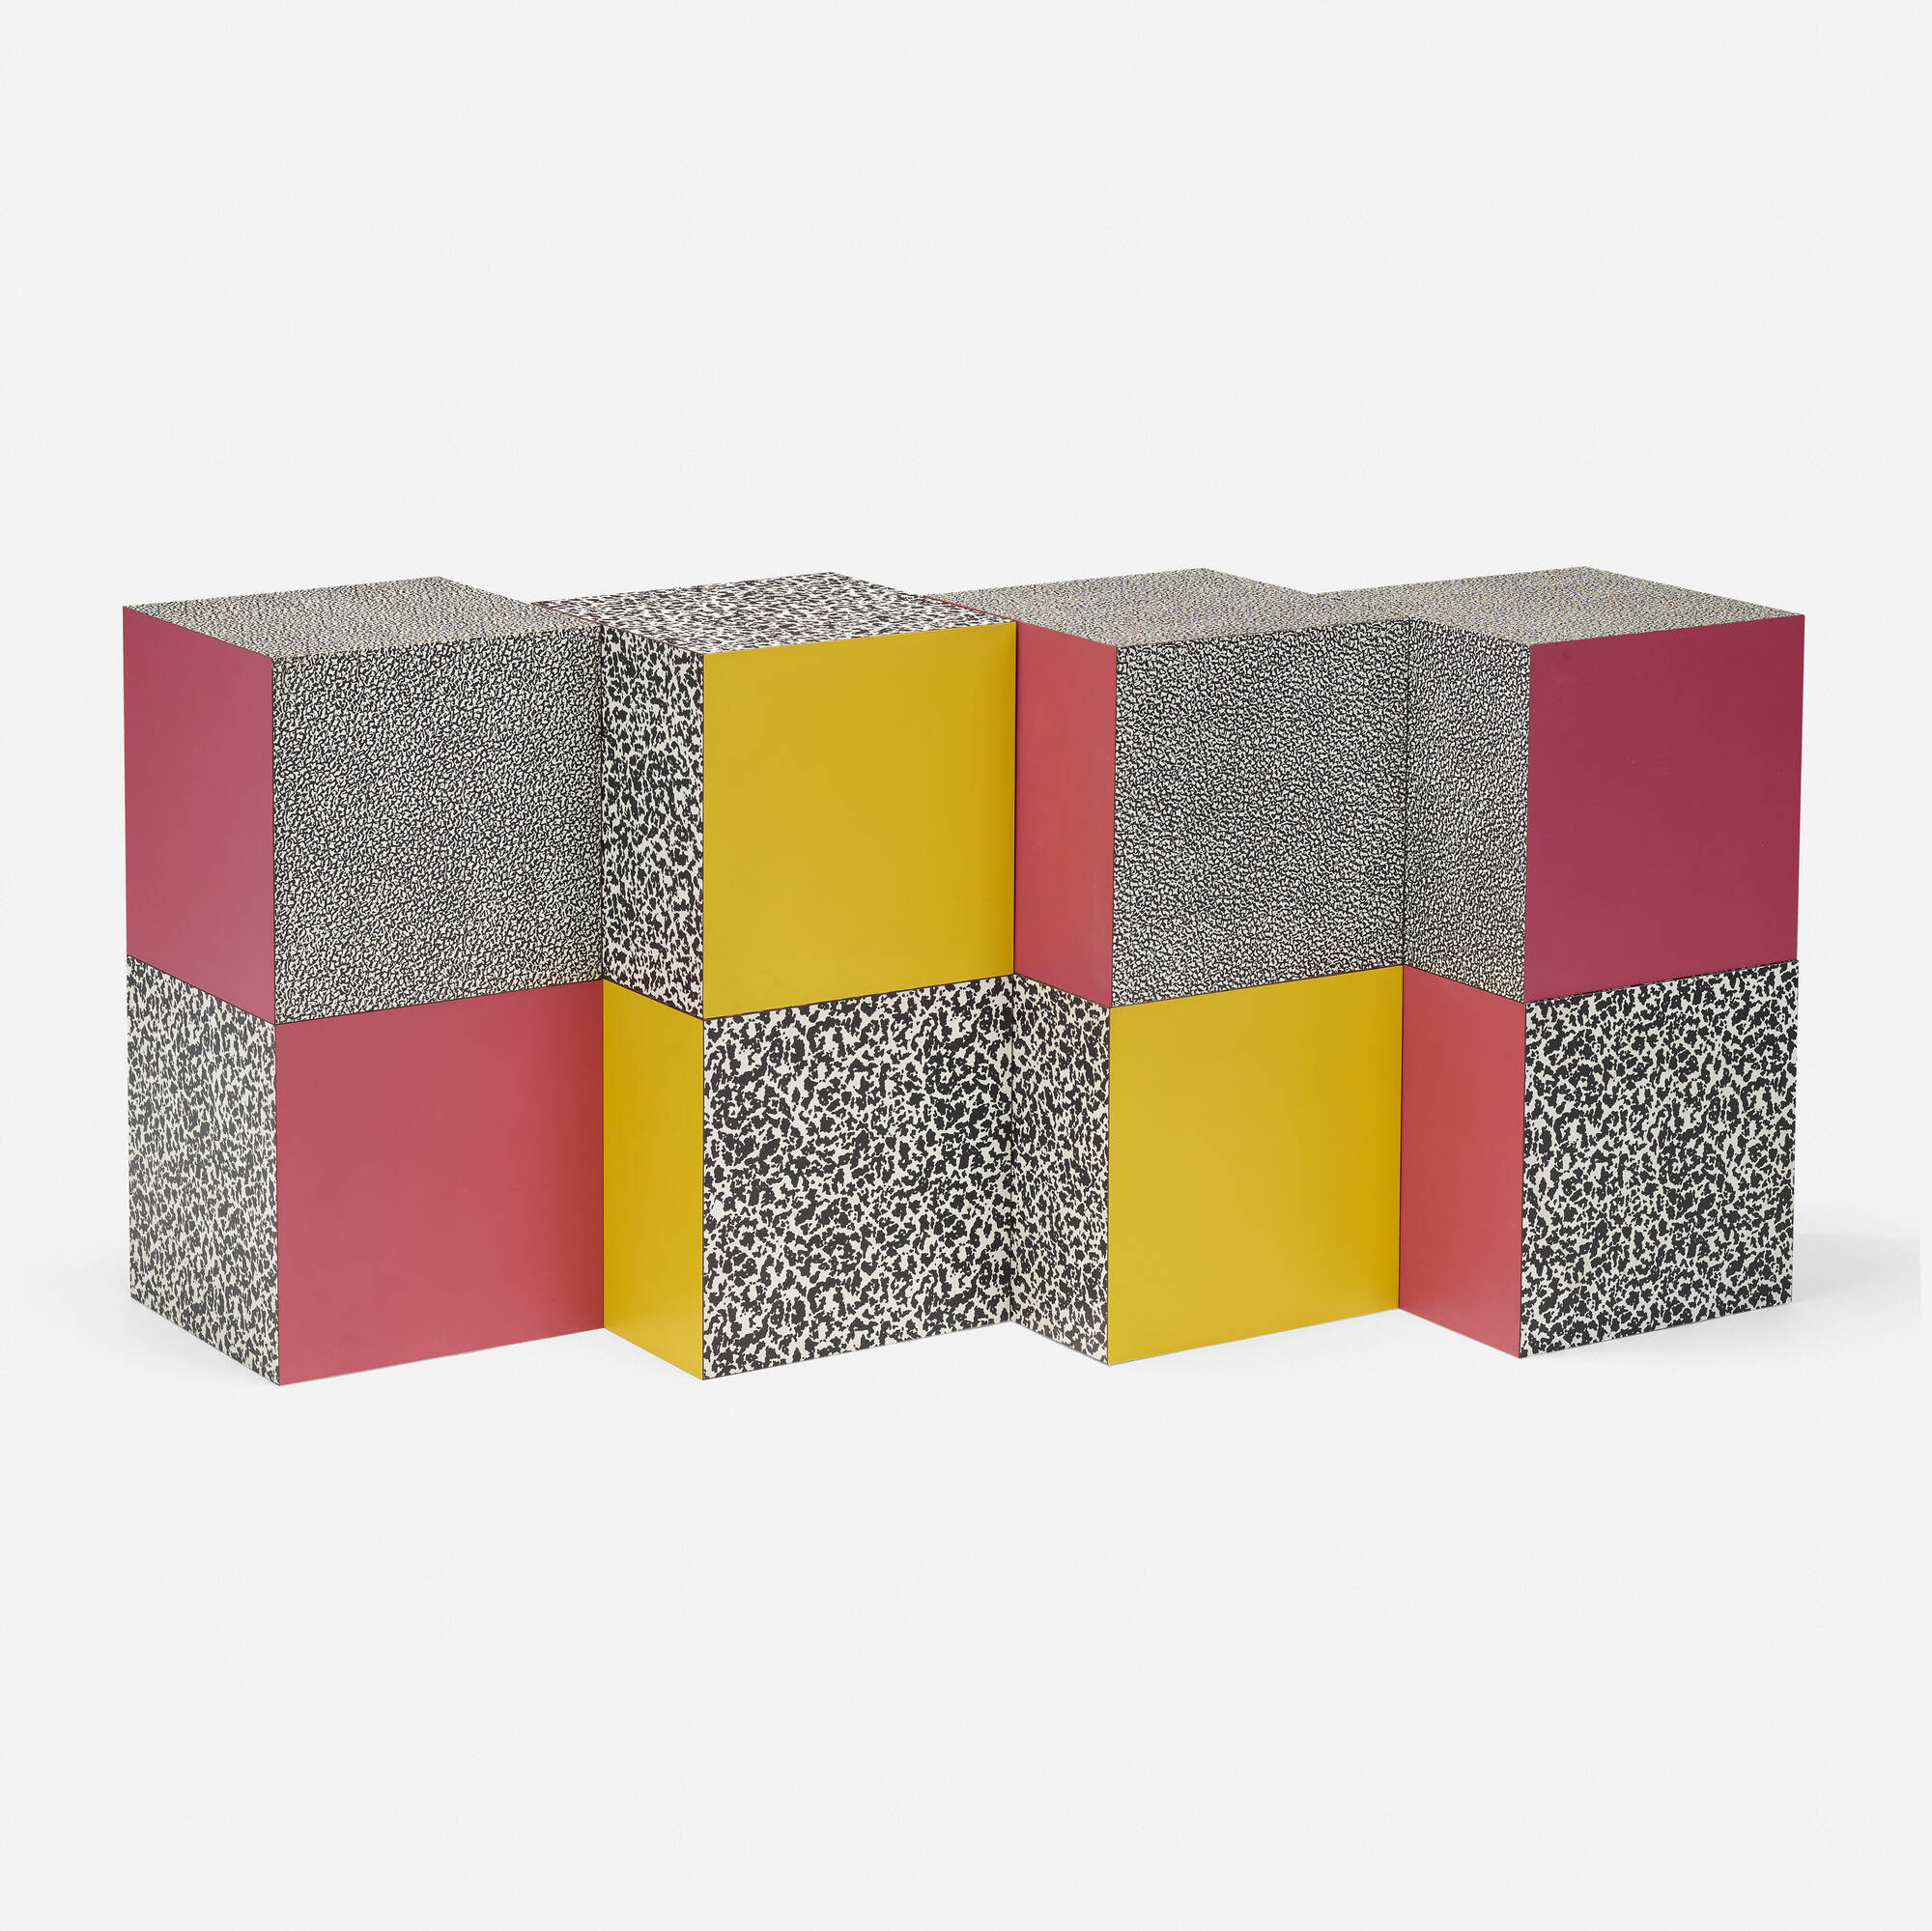 110: ETTORE SOTTSASS, Collection of eight 